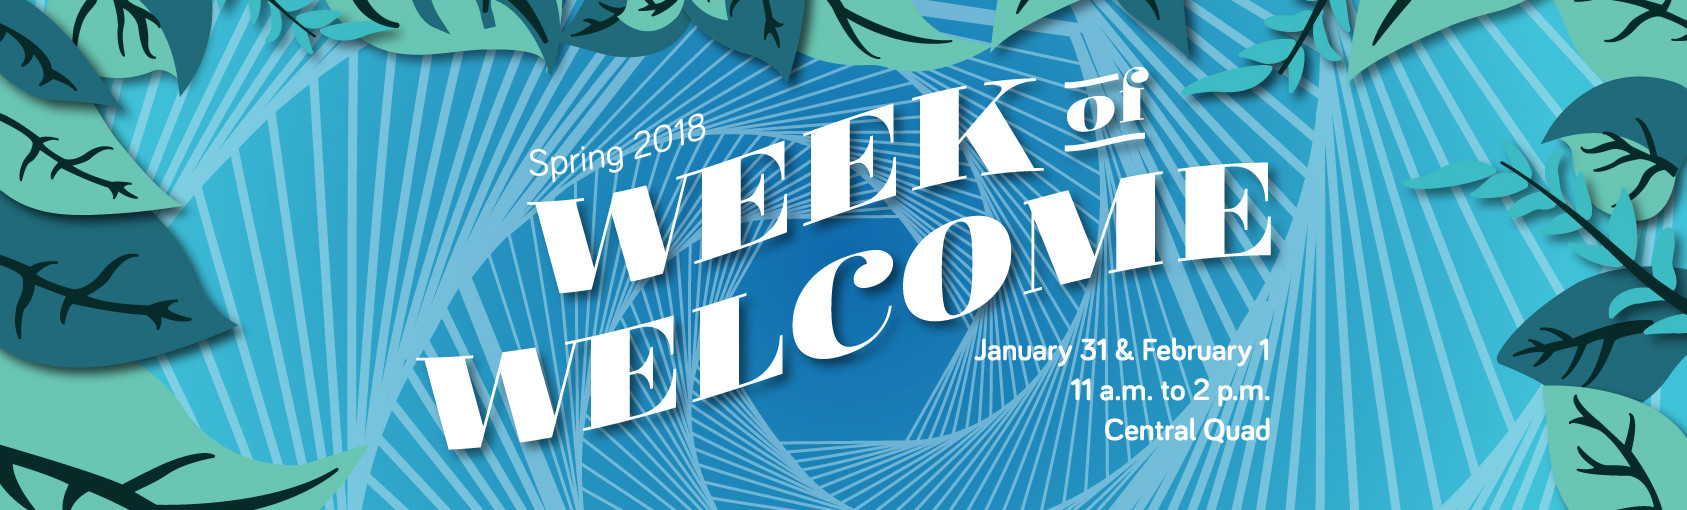 Week of Welcome 2018 banner